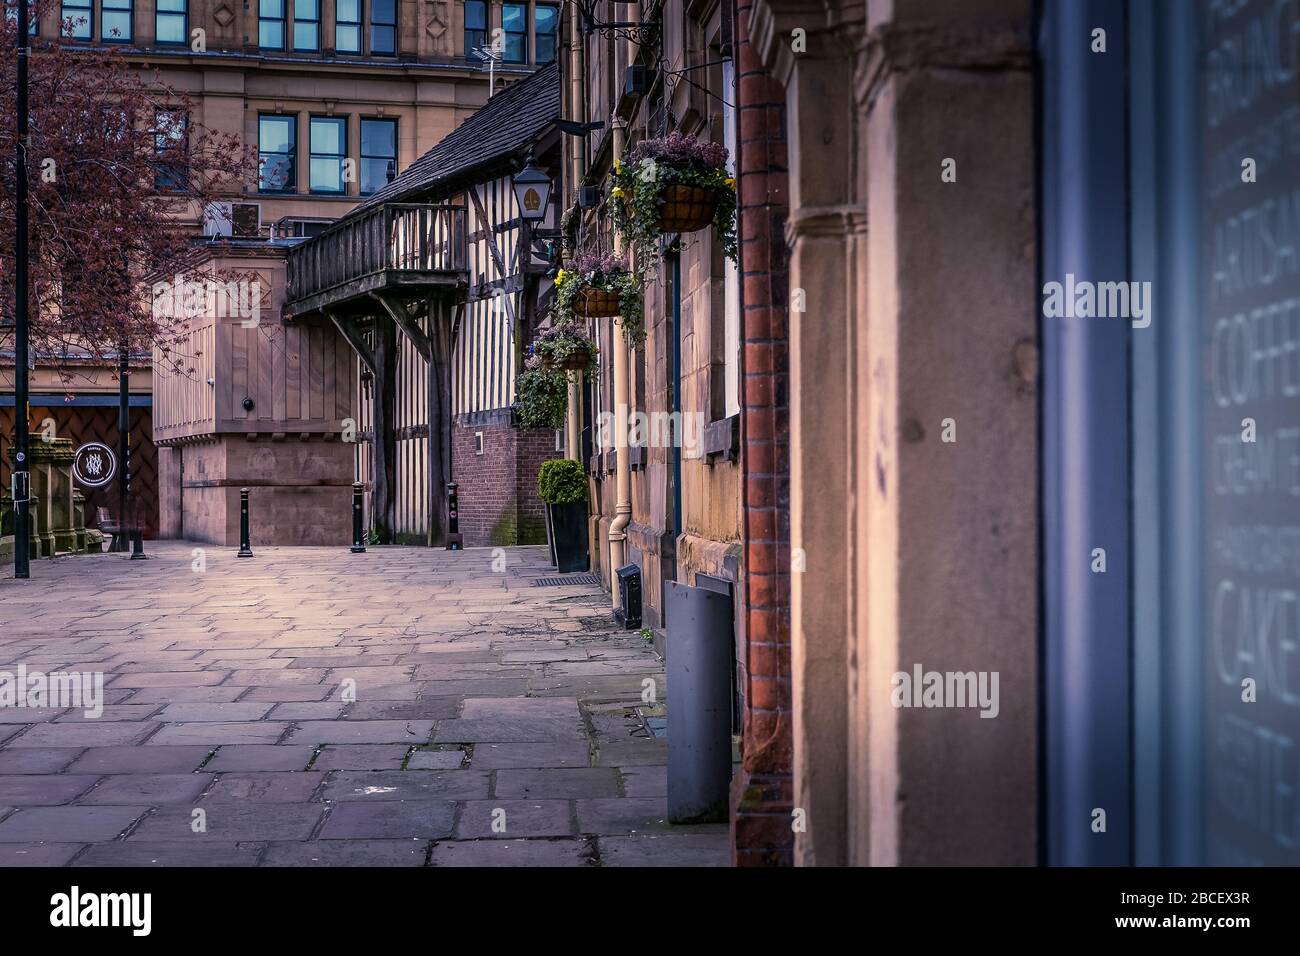 Cathedral Cafe, Cateaton St, Manchester, United Kingdom. Empty streets, closed business's during the coronavirus outbreak, April 2020. Stock Photo